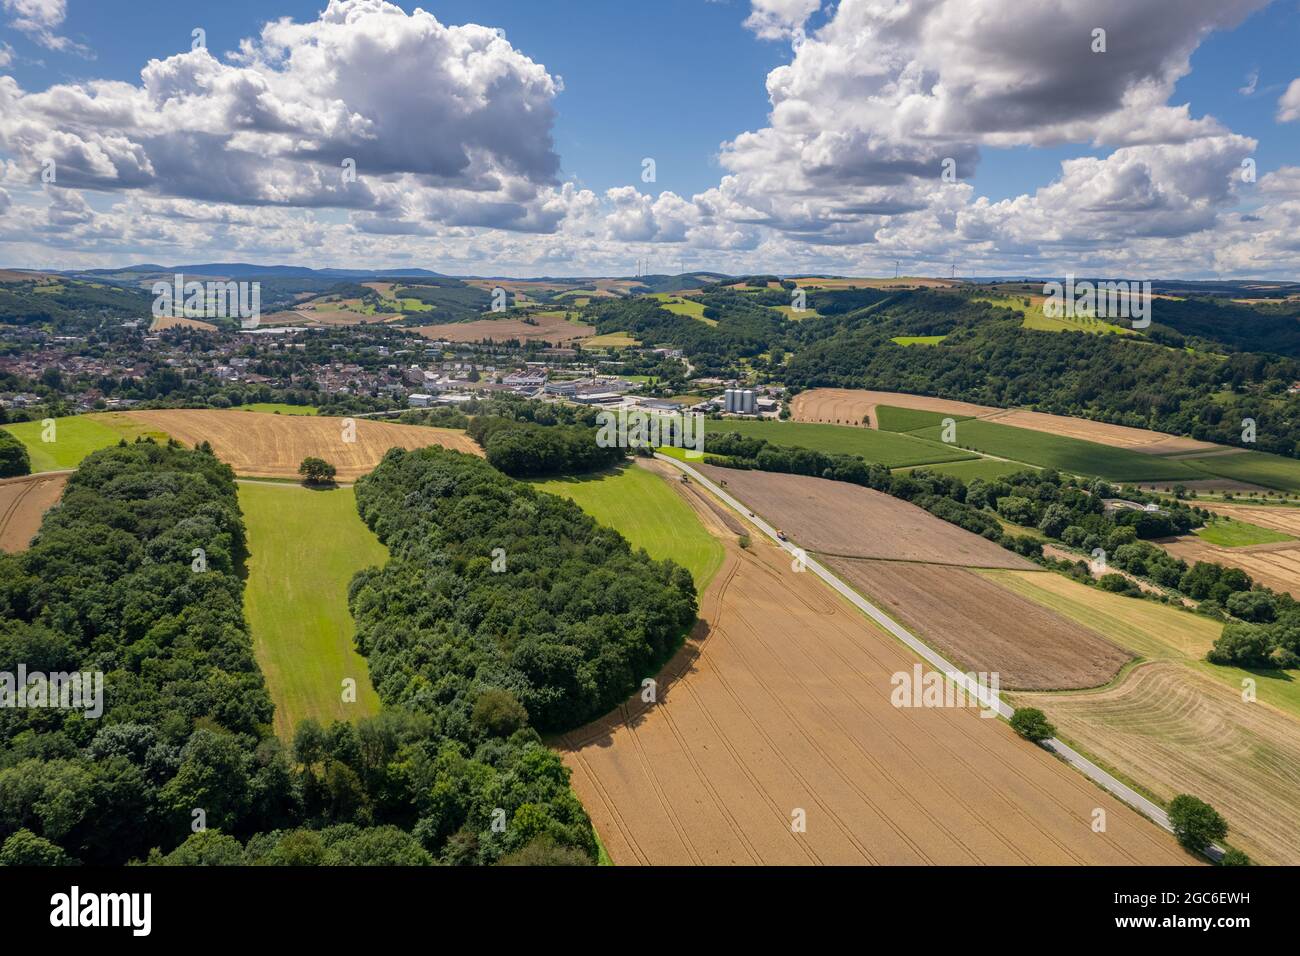 Aerial view of a landscape in Rhineland-Palatinate, Germany on the river Glan with the town of Meisenheim in the background Stock Photo